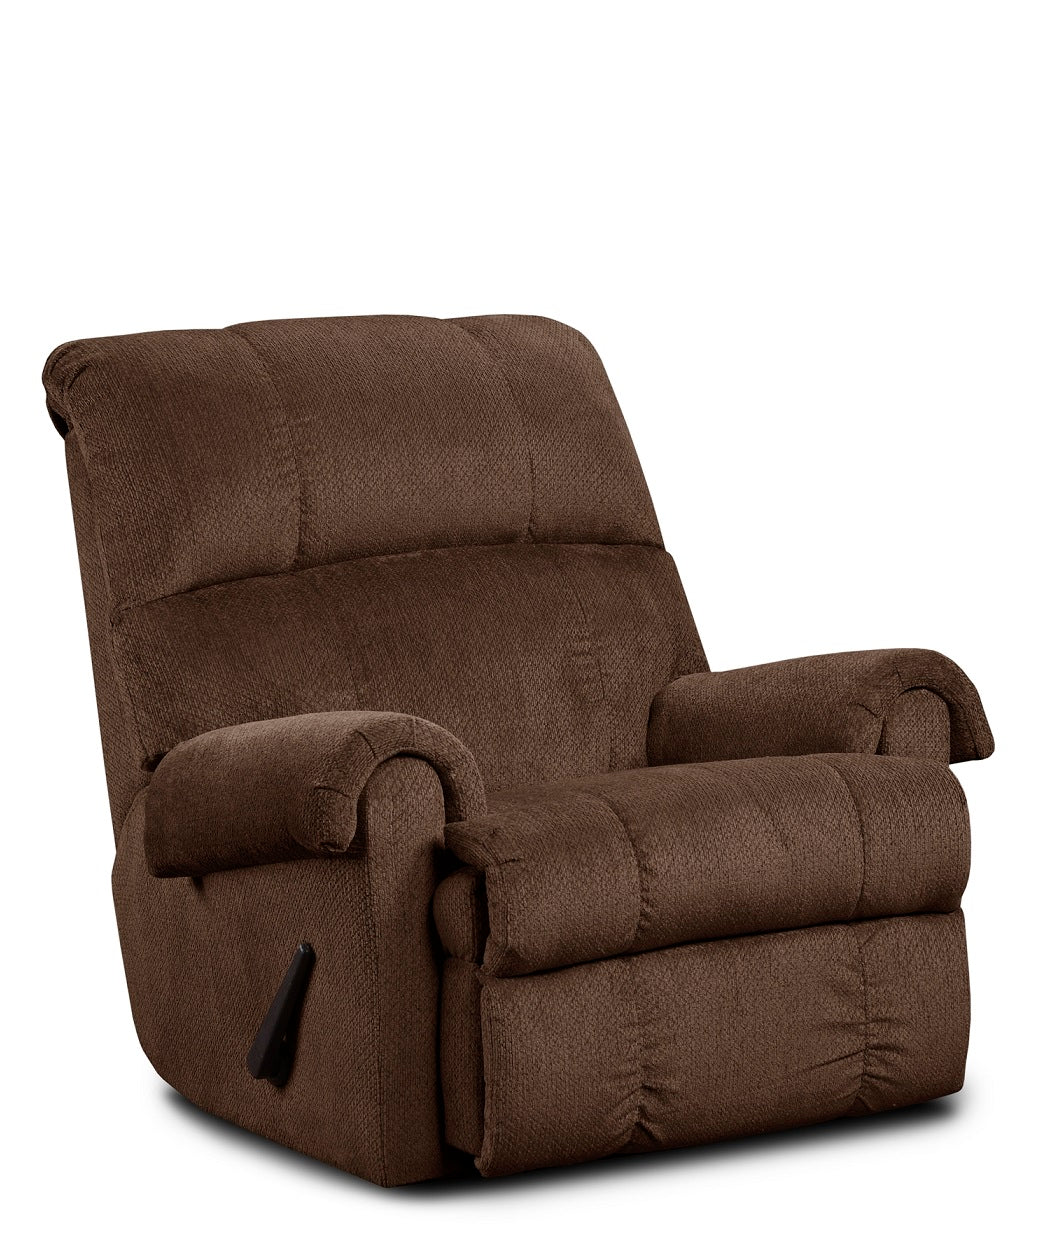 Kelly Chocolate Recliner by Washington Furniture